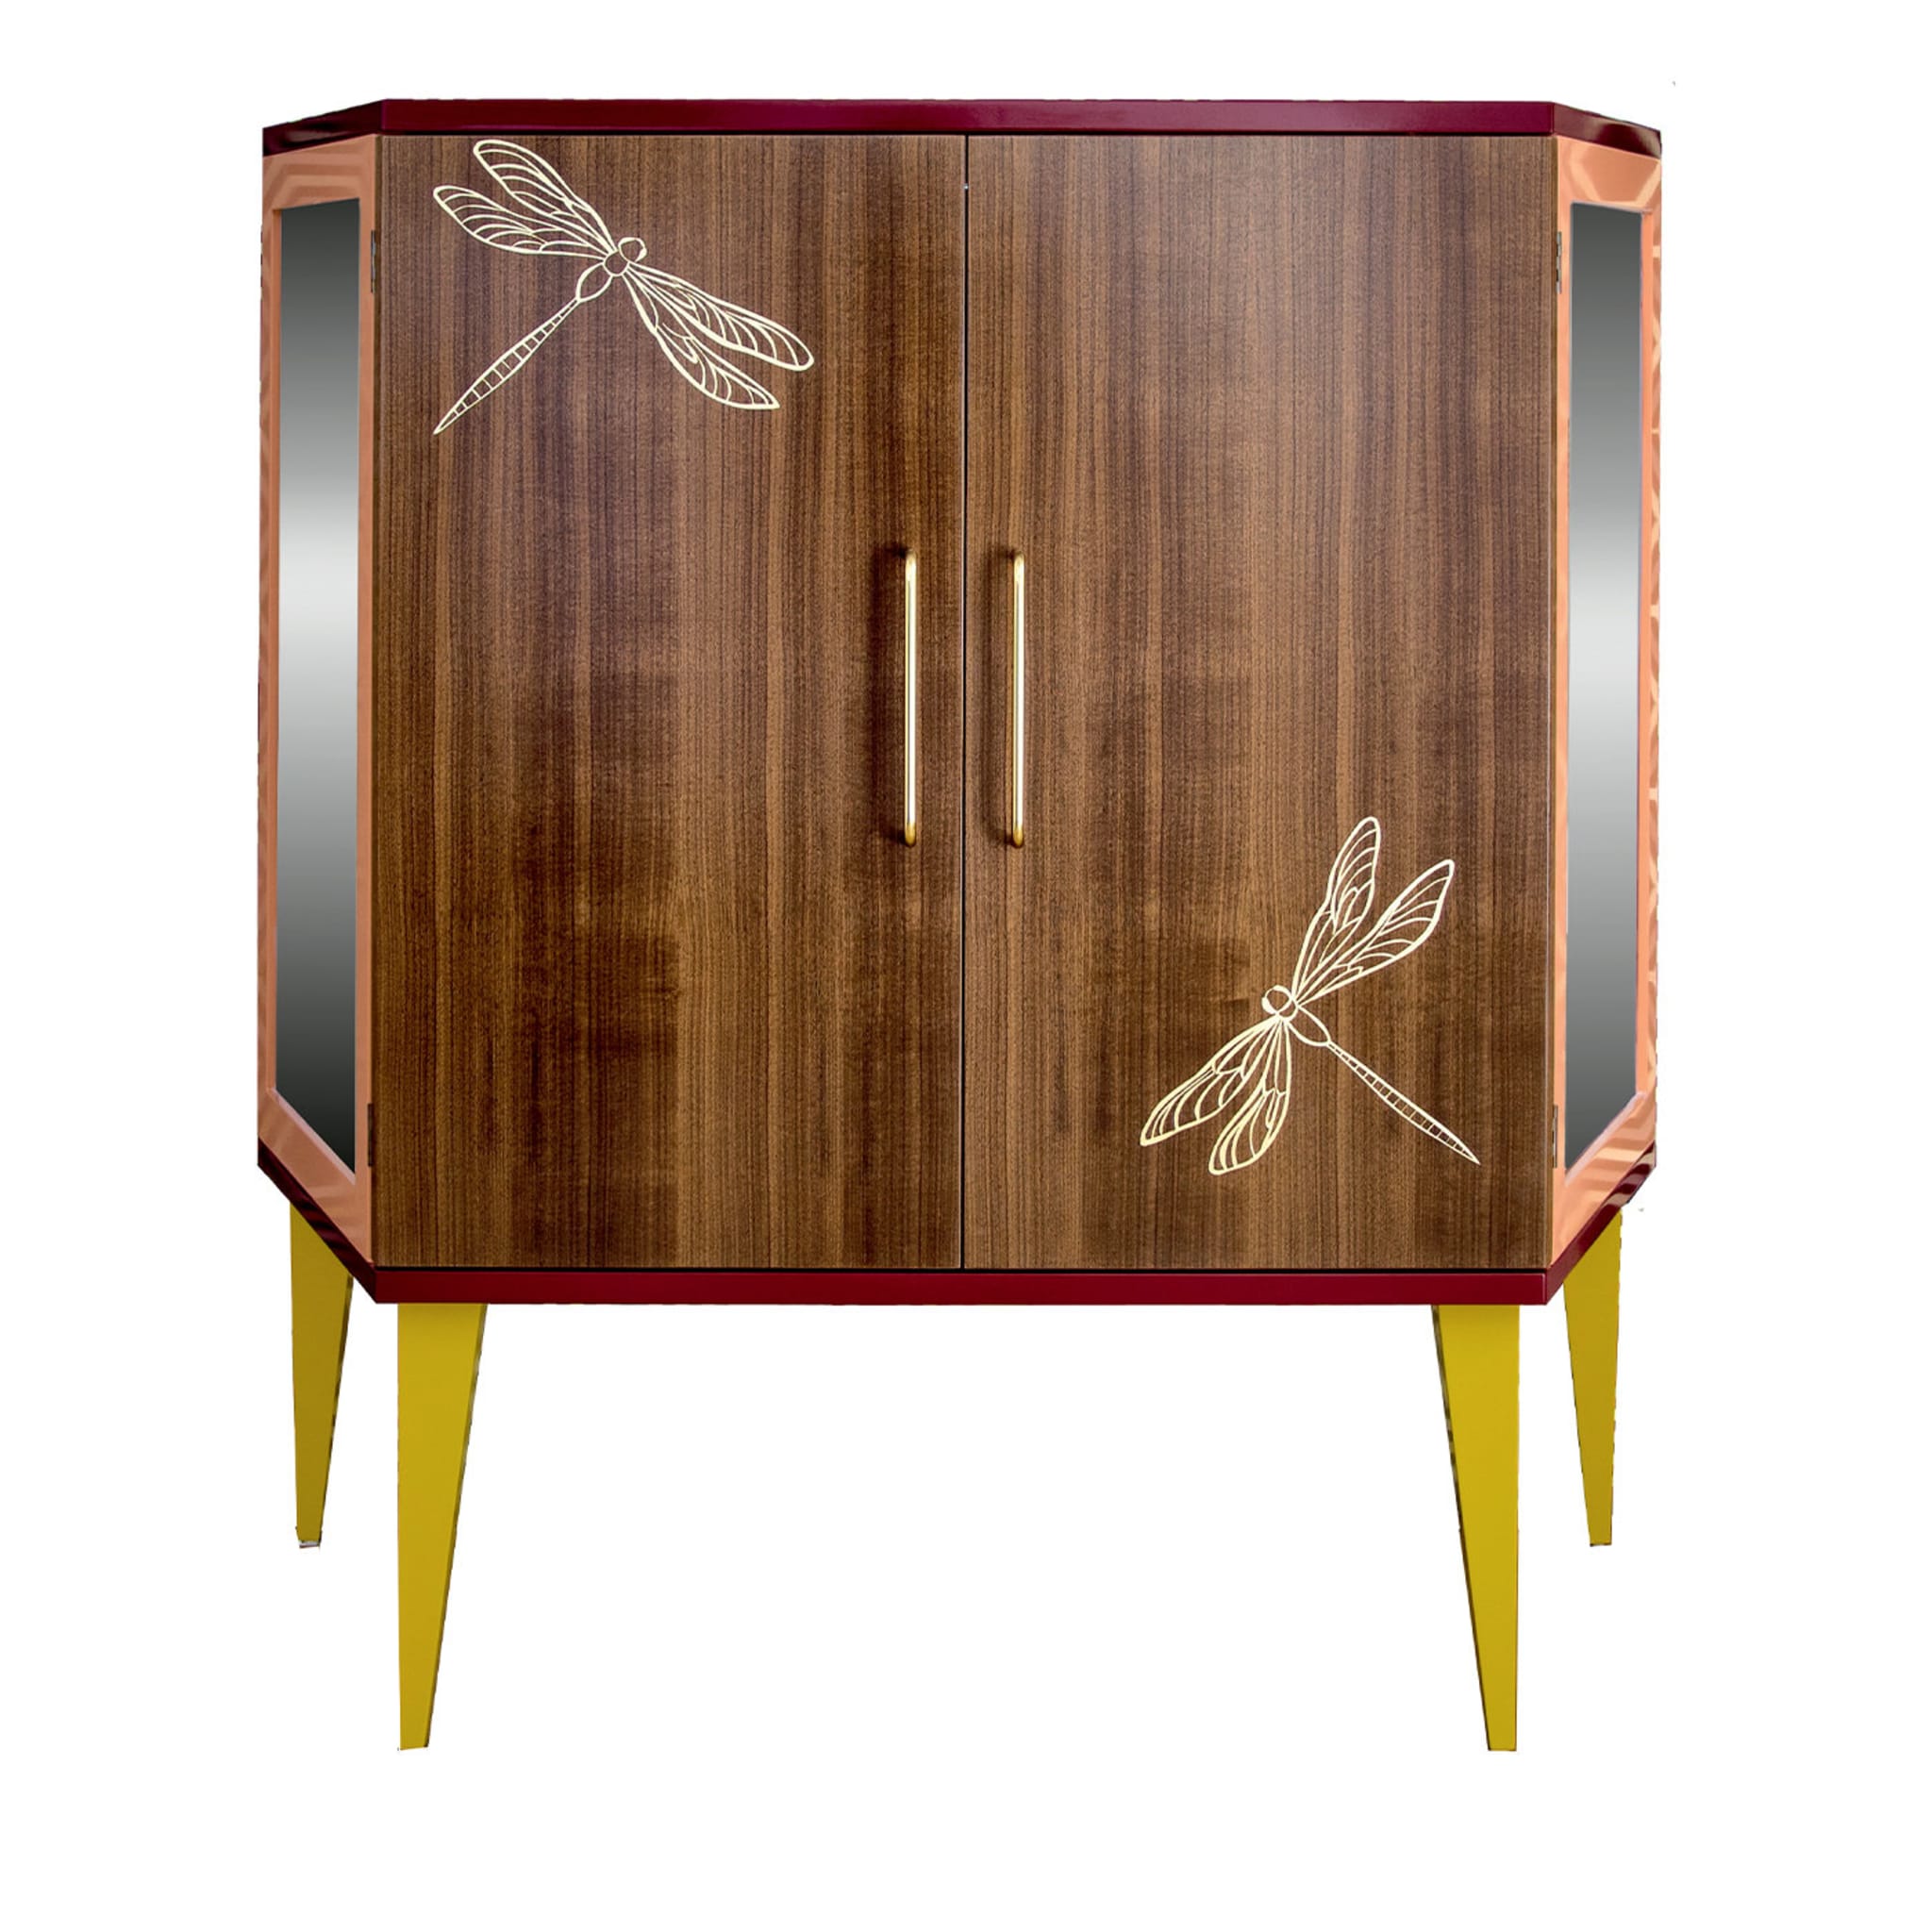 Libellula Shoe Cabinet by Chie Mihara - Main view